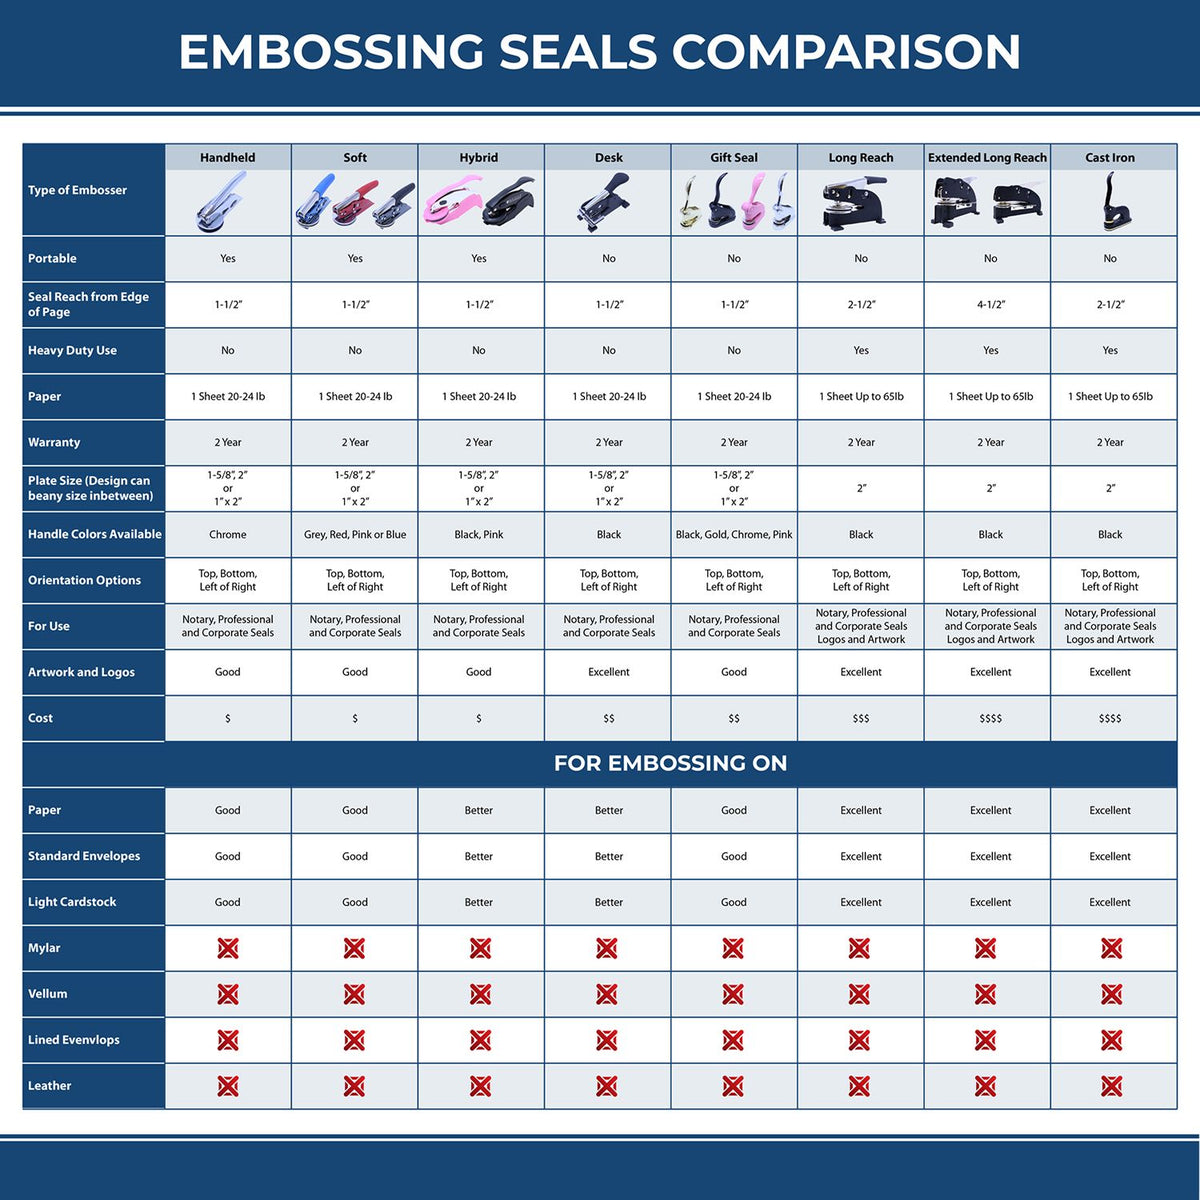 A comparison chart for the different types of mount models available for the Extended Long Reach Kentucky Architect Seal Embosser.